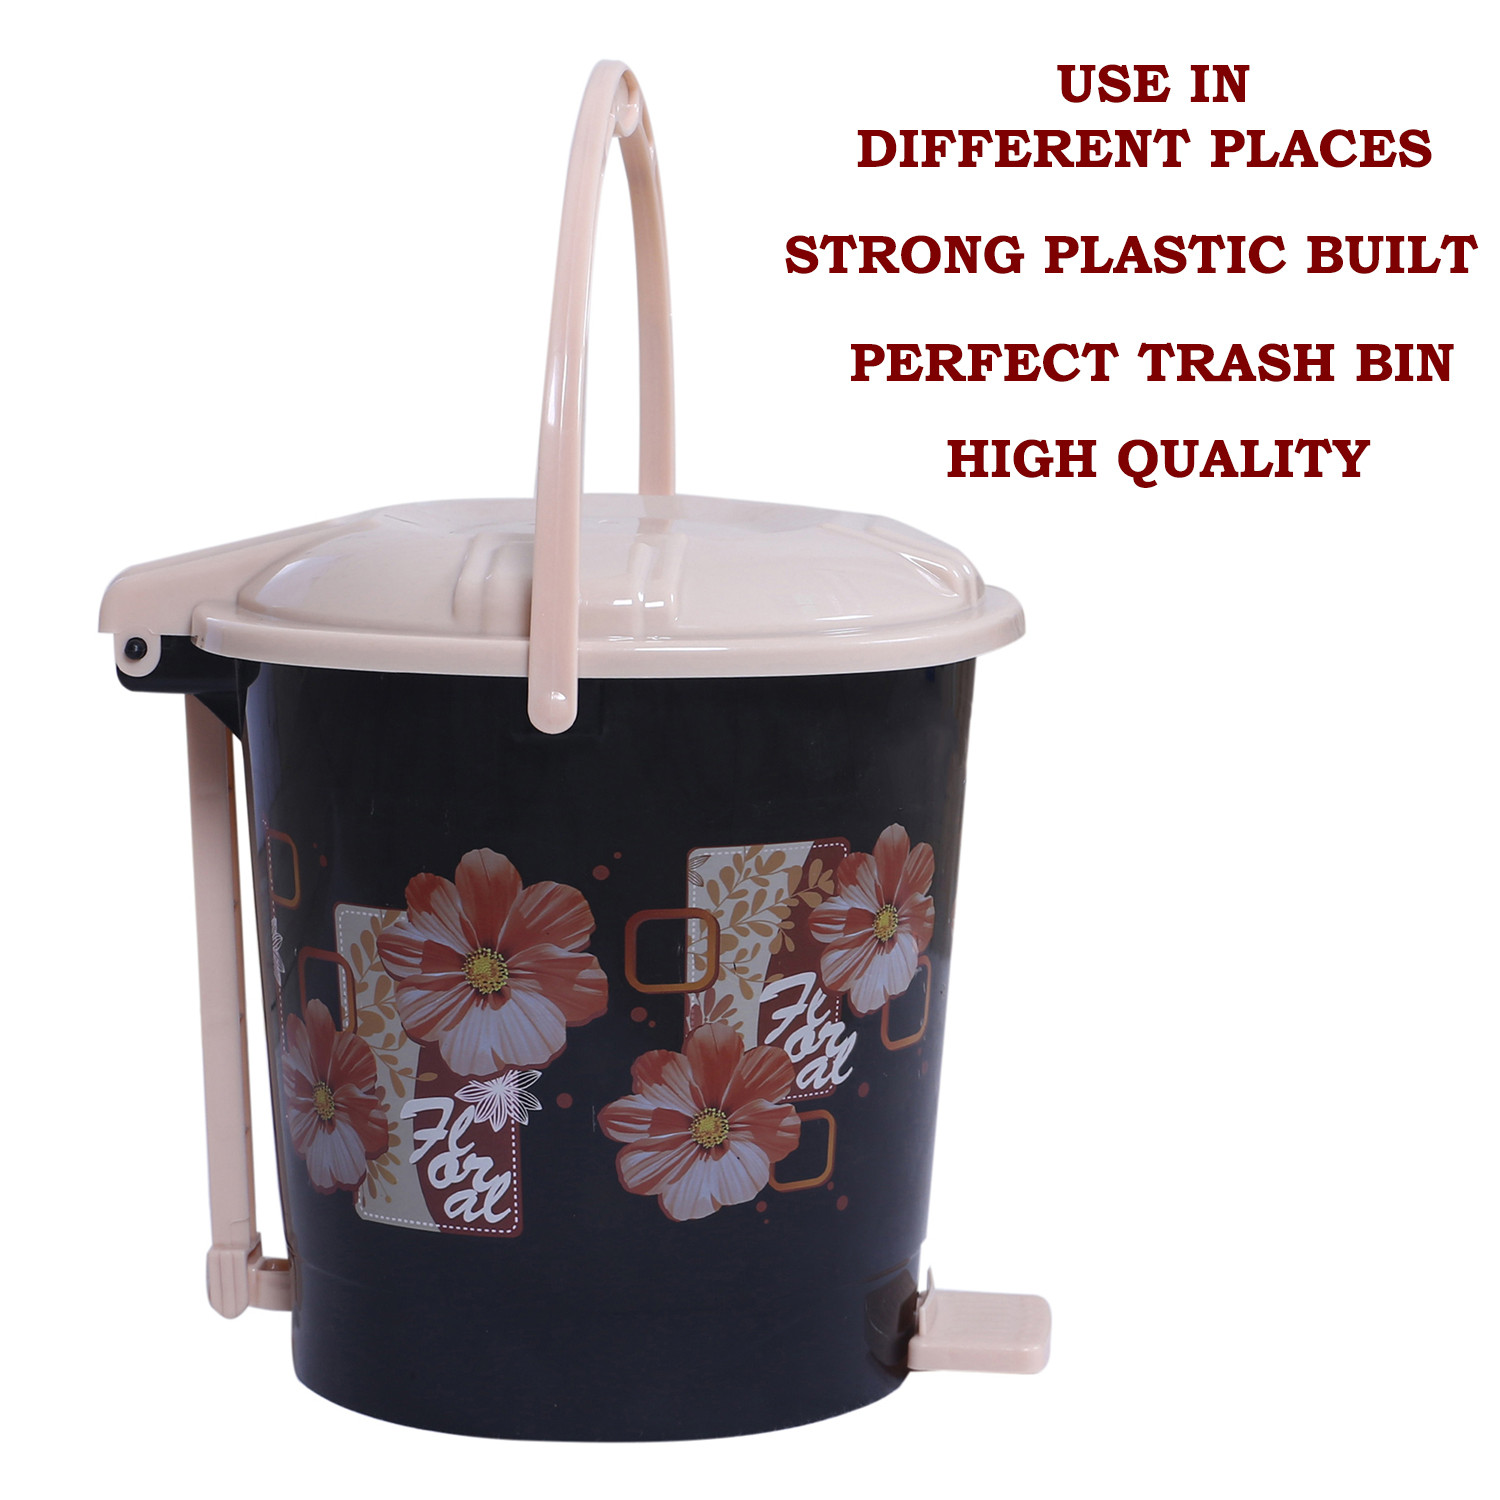 Kuber Industries Durable Floral Print Plastic Pedal Dustbin|Waste Bin|Trash Can For Kitchen & Home With Handle,7 Litre (Black)